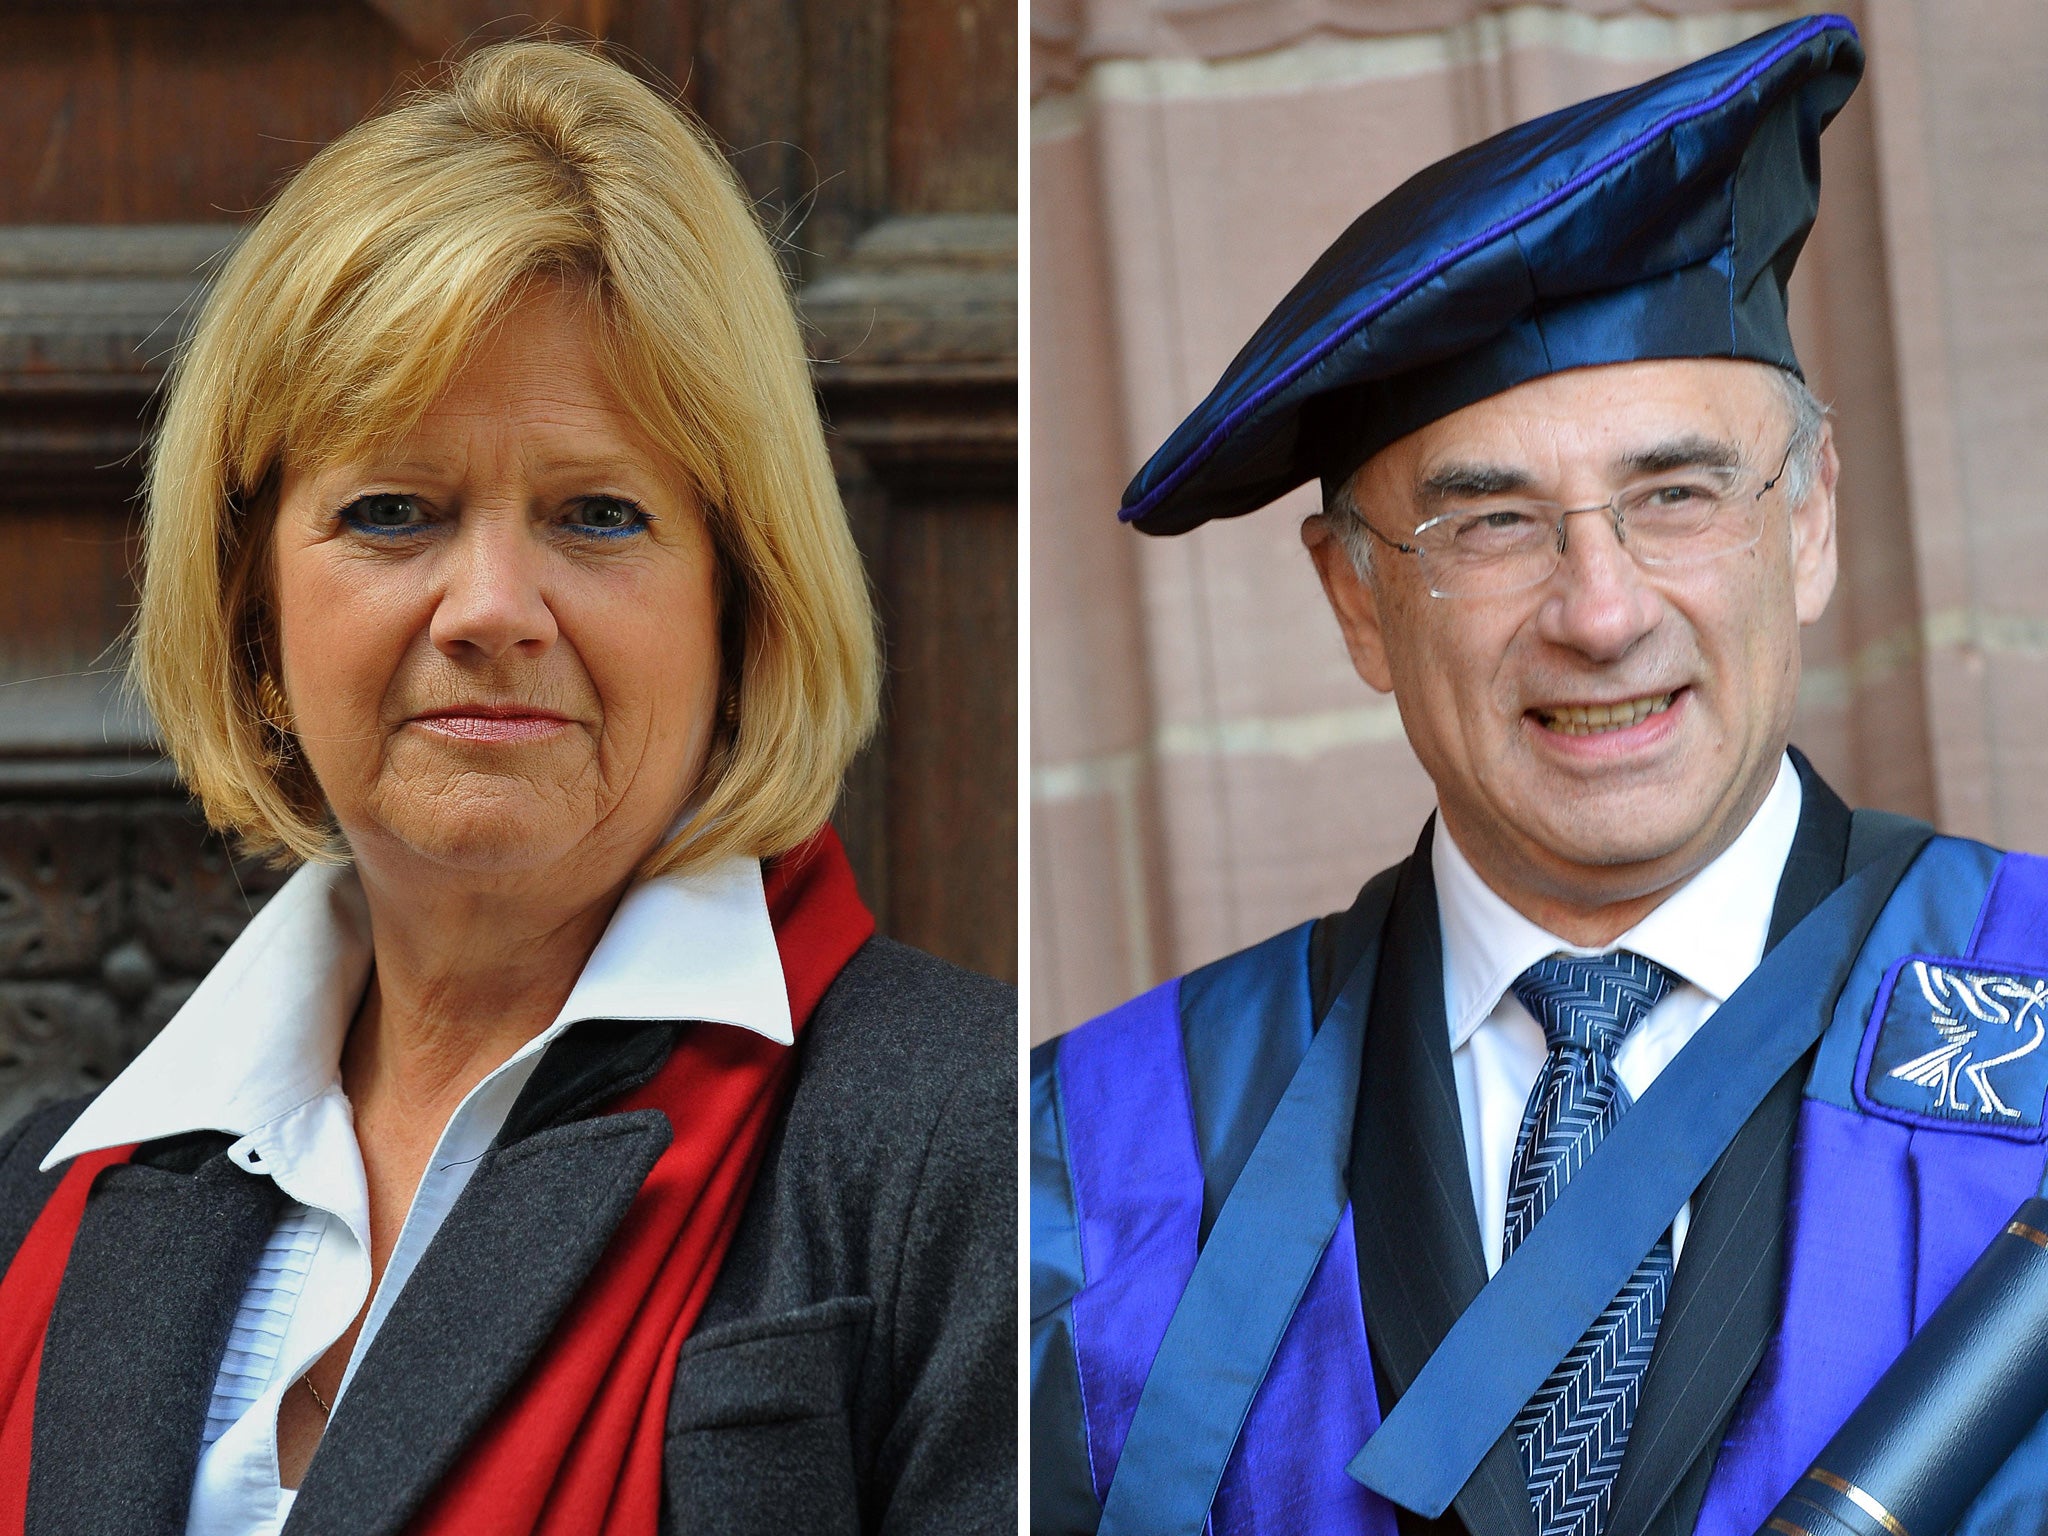 Some of the country’s sharpest brains, including Lady Justice Hallett (left) and Lord Justice Leveson, have just been interviewed for the job of Supreme Court justice